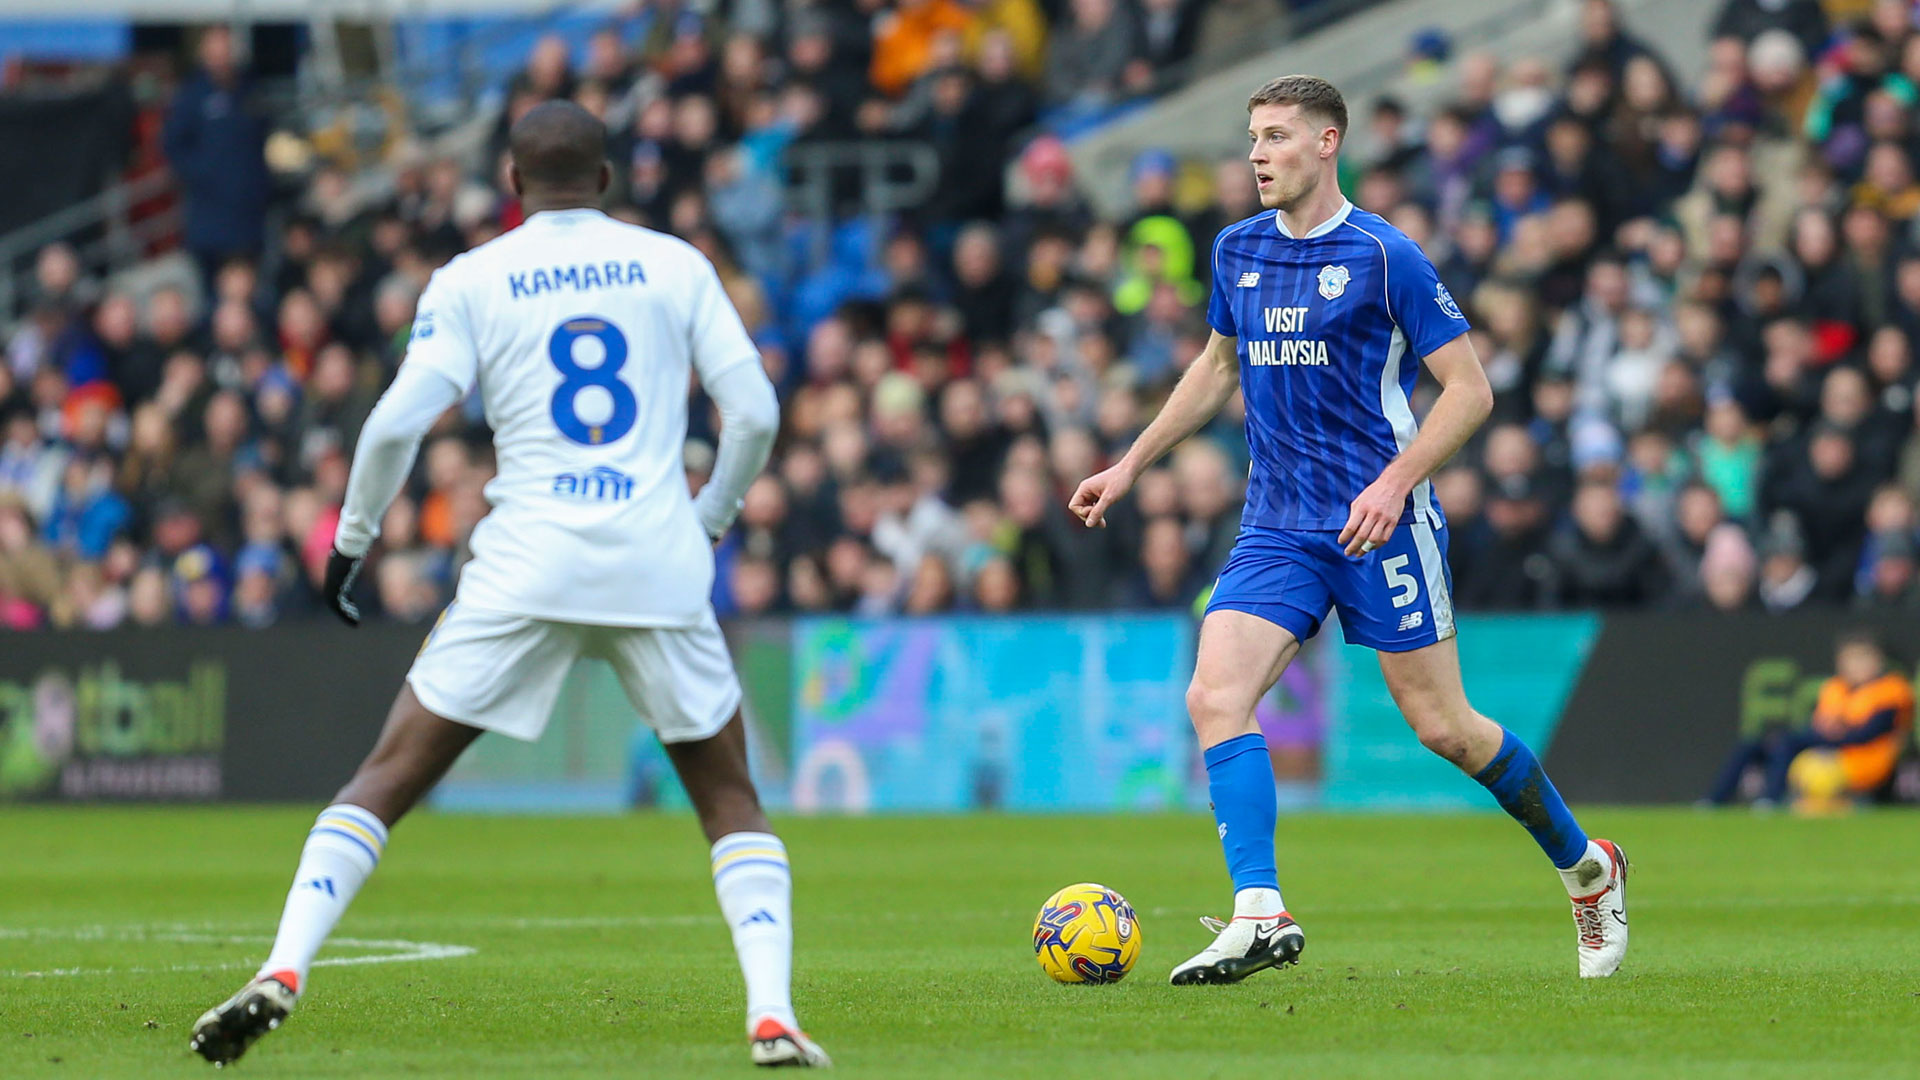 Mark McGuinness in action for Cardiff City